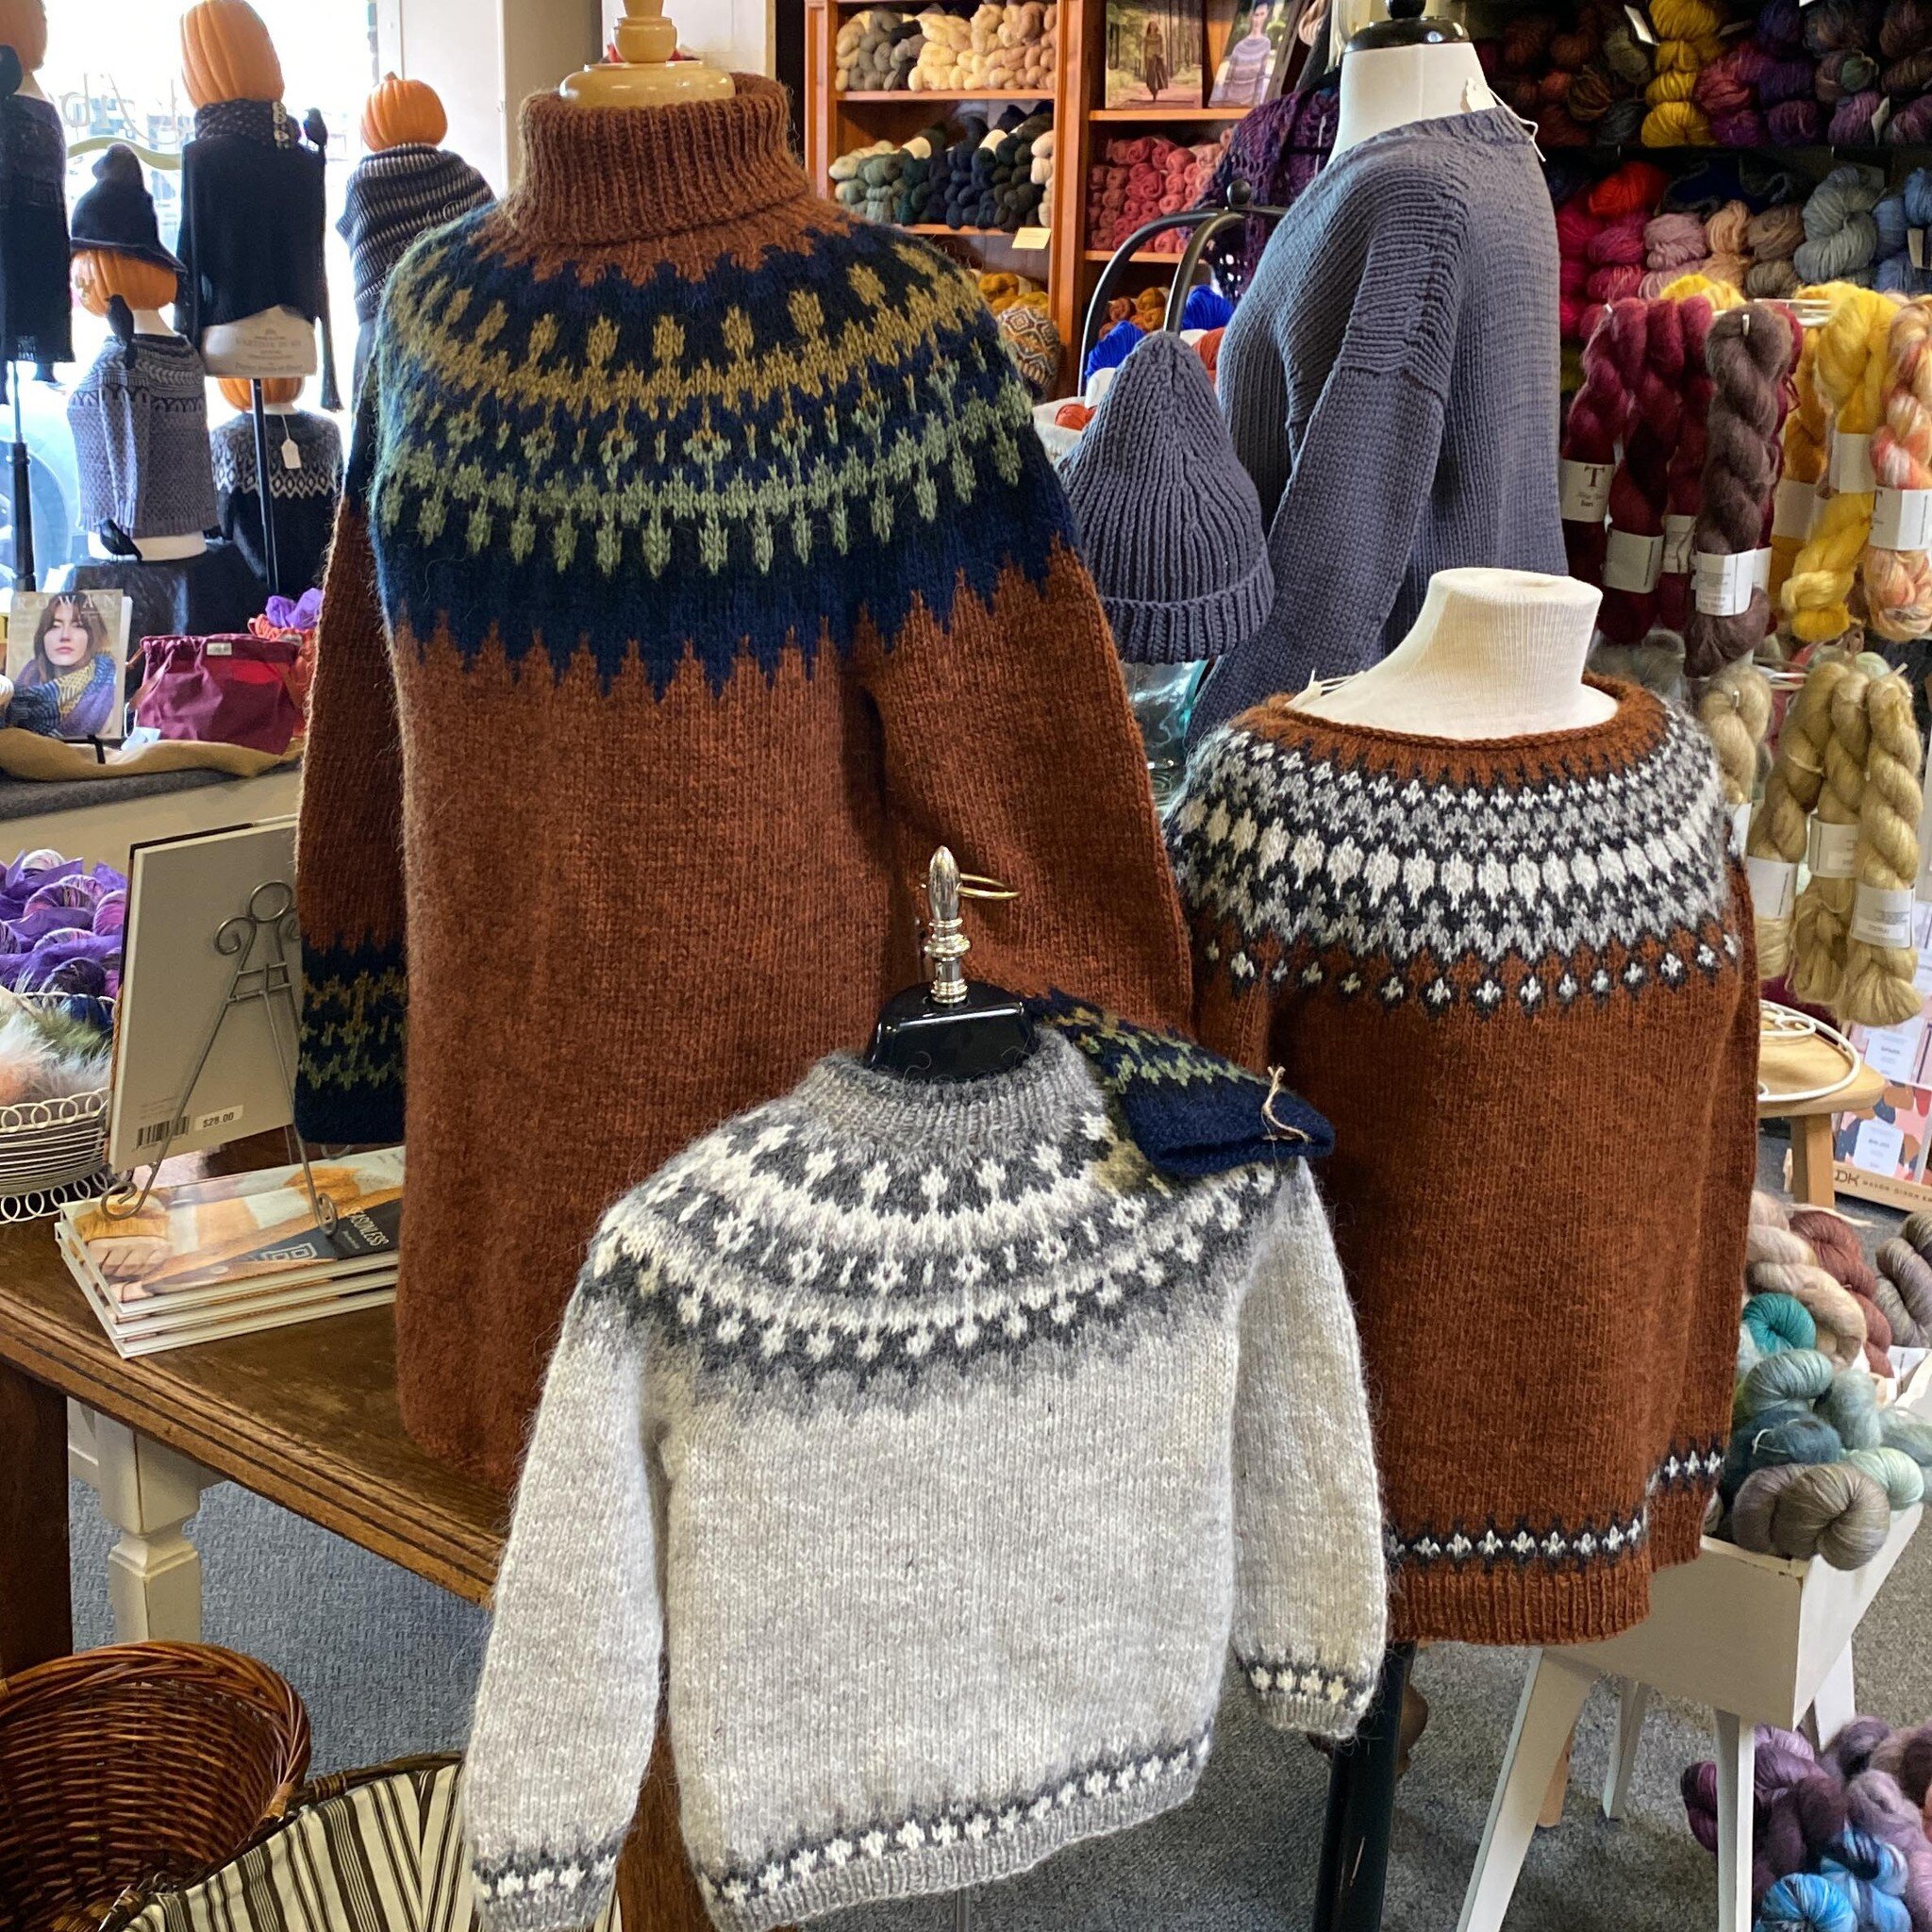 We have some lovely Lettlopi sweaters on display this week! Stop in and check them out along with the plethora of colors available.  #wildfibersyarns  #lopiyarn #lettlopi #istexlettlopi #colorworkknitting #colorworksweater #localyarnshop #localyarnst